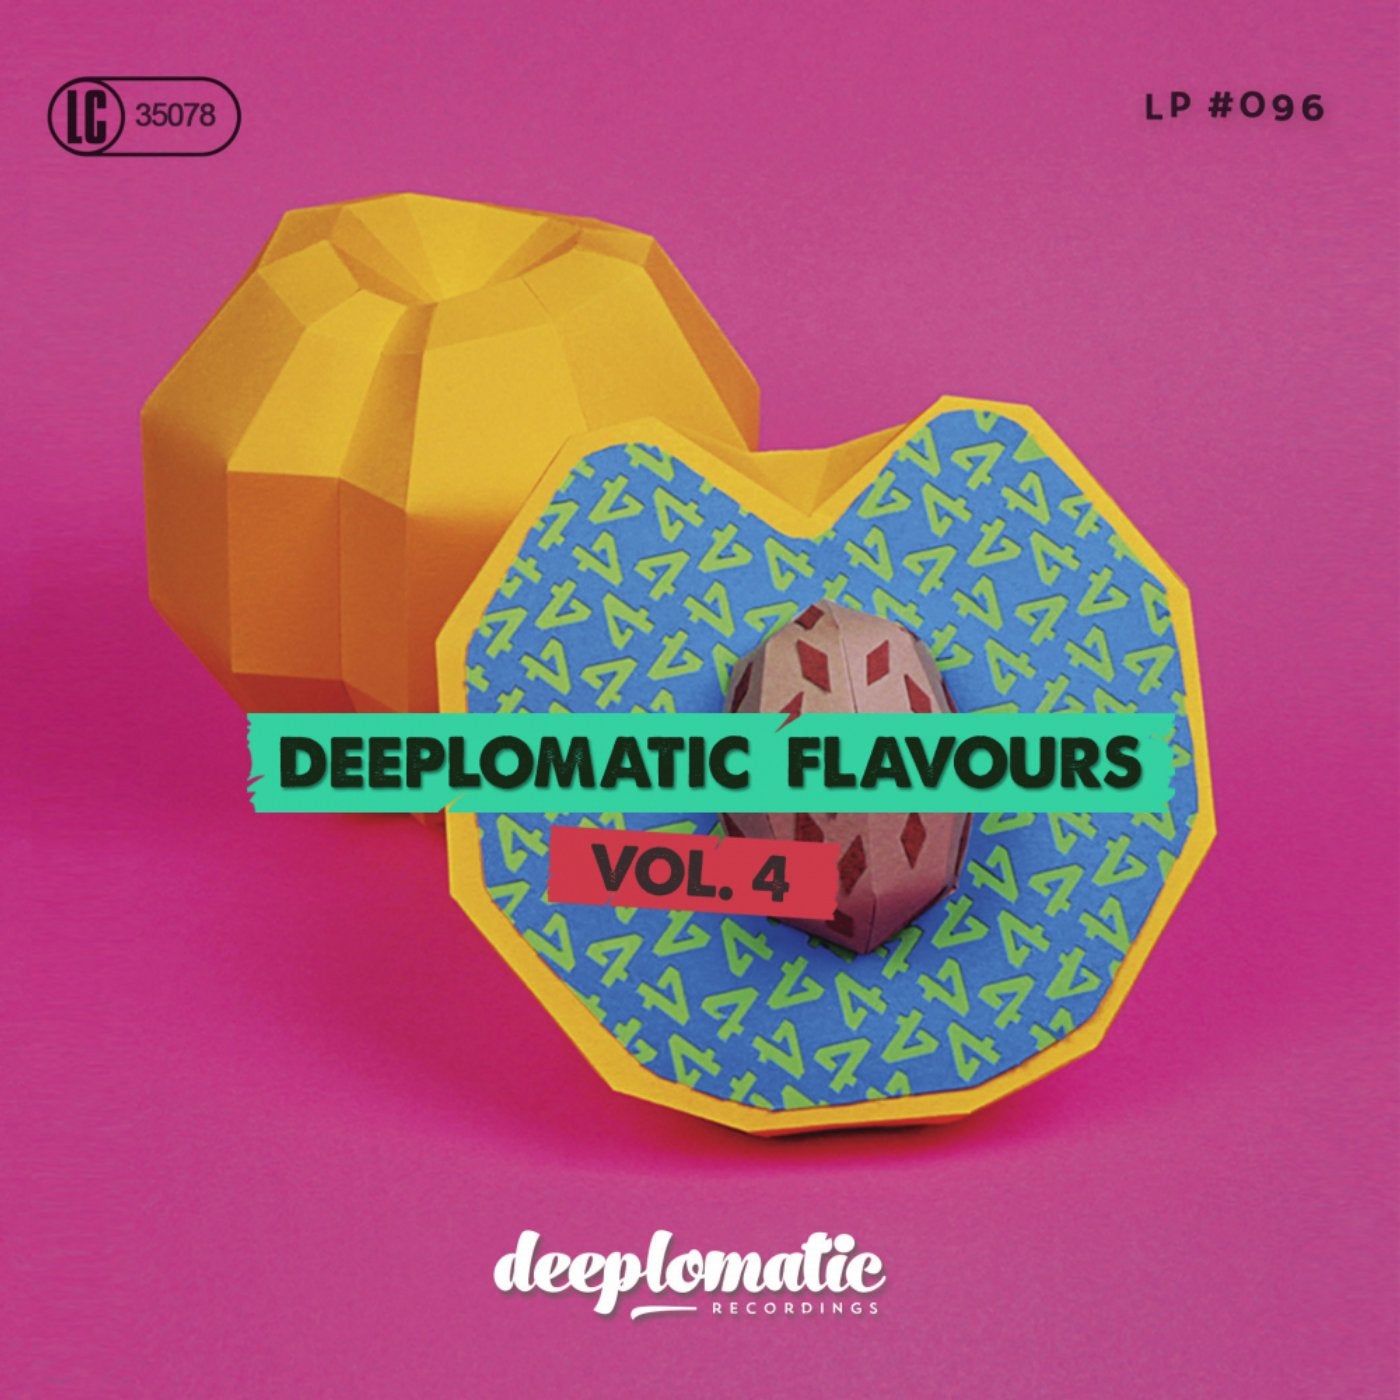 Deeplomatic Flavours, Vol. 4